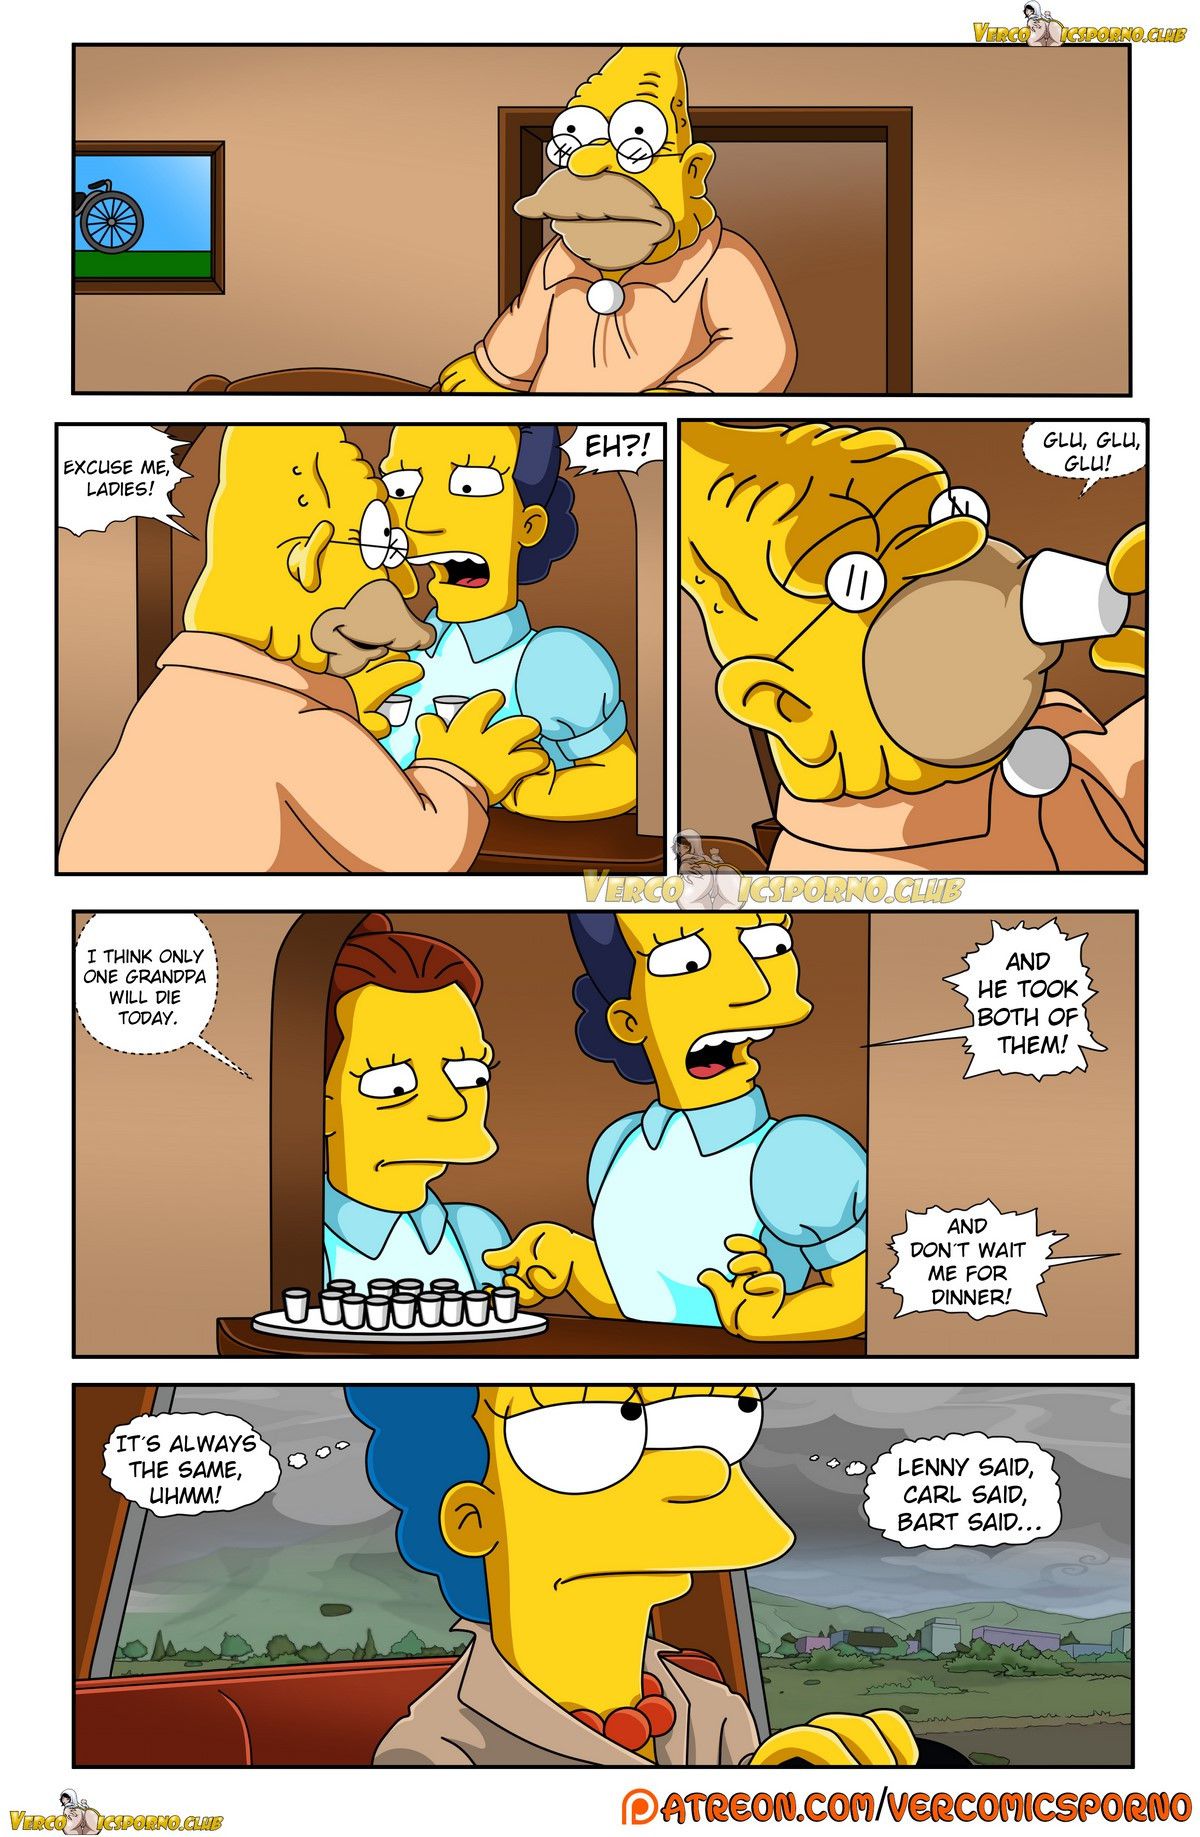 Grandpa and me - [Itooneaxxx] - [Drah Navlag] - [VCP] - [The Simpsons] 8